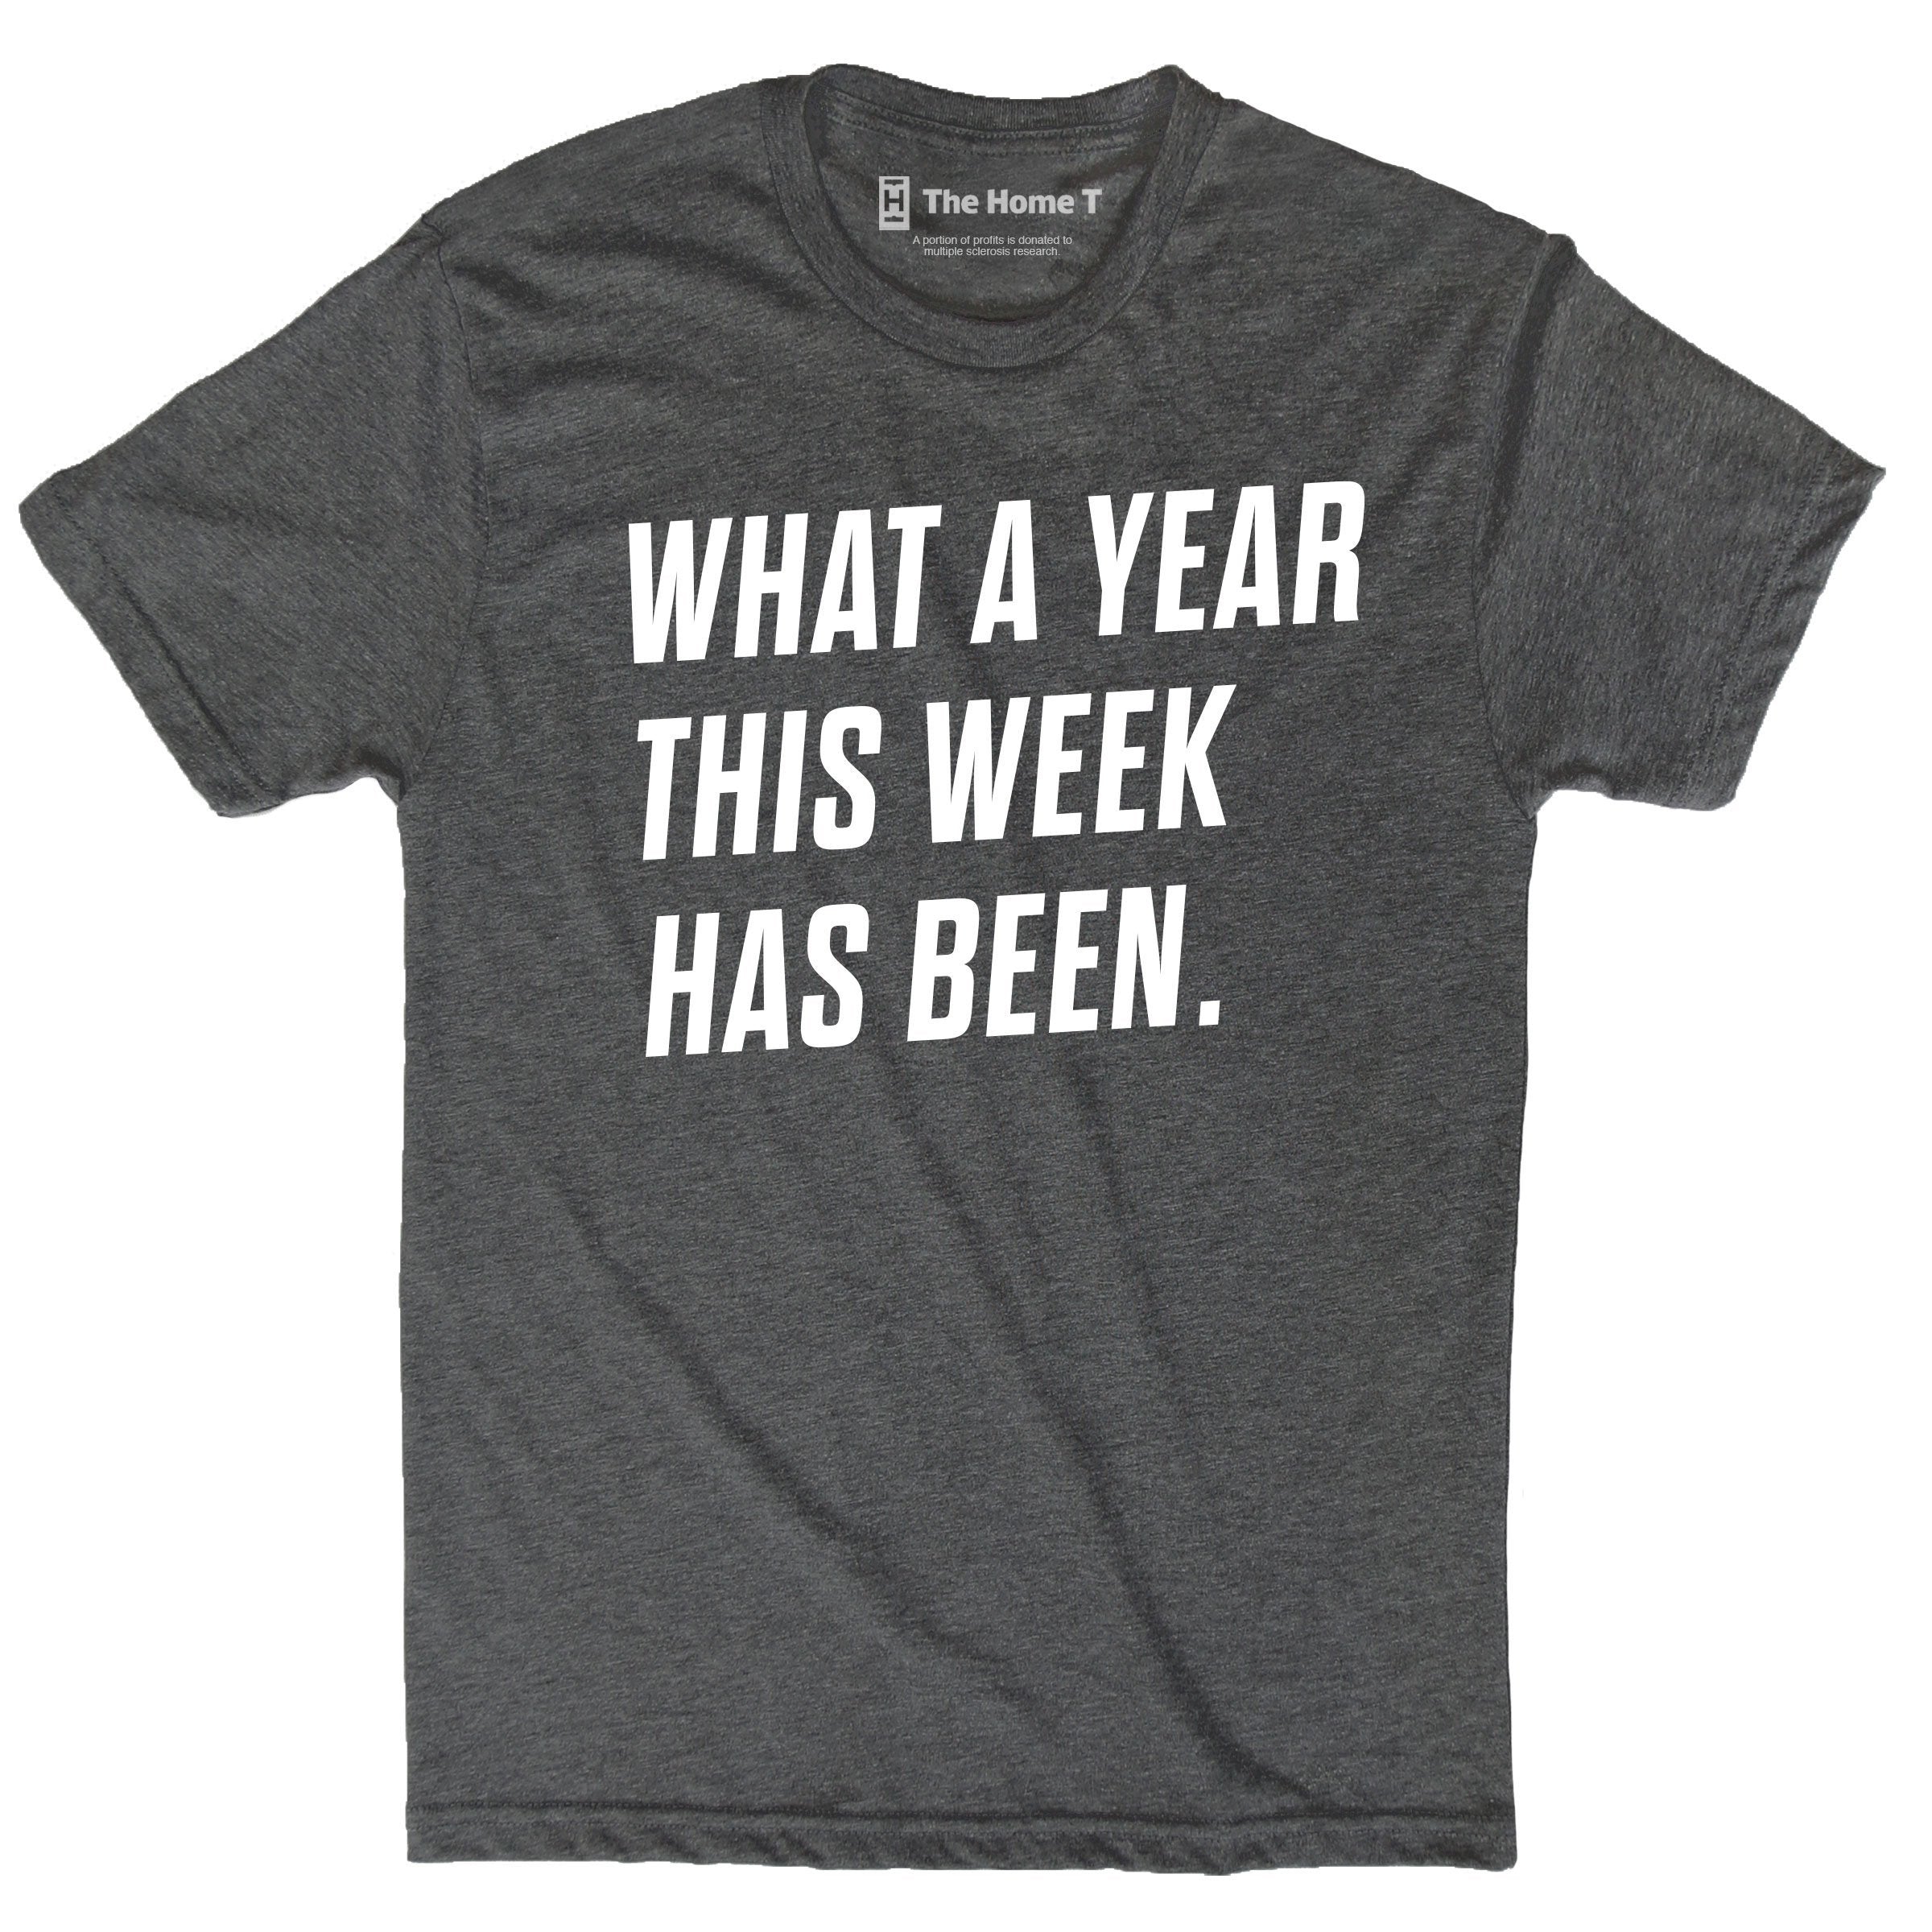 What a Year this Week has Been Crew neck The Home T XS Grey